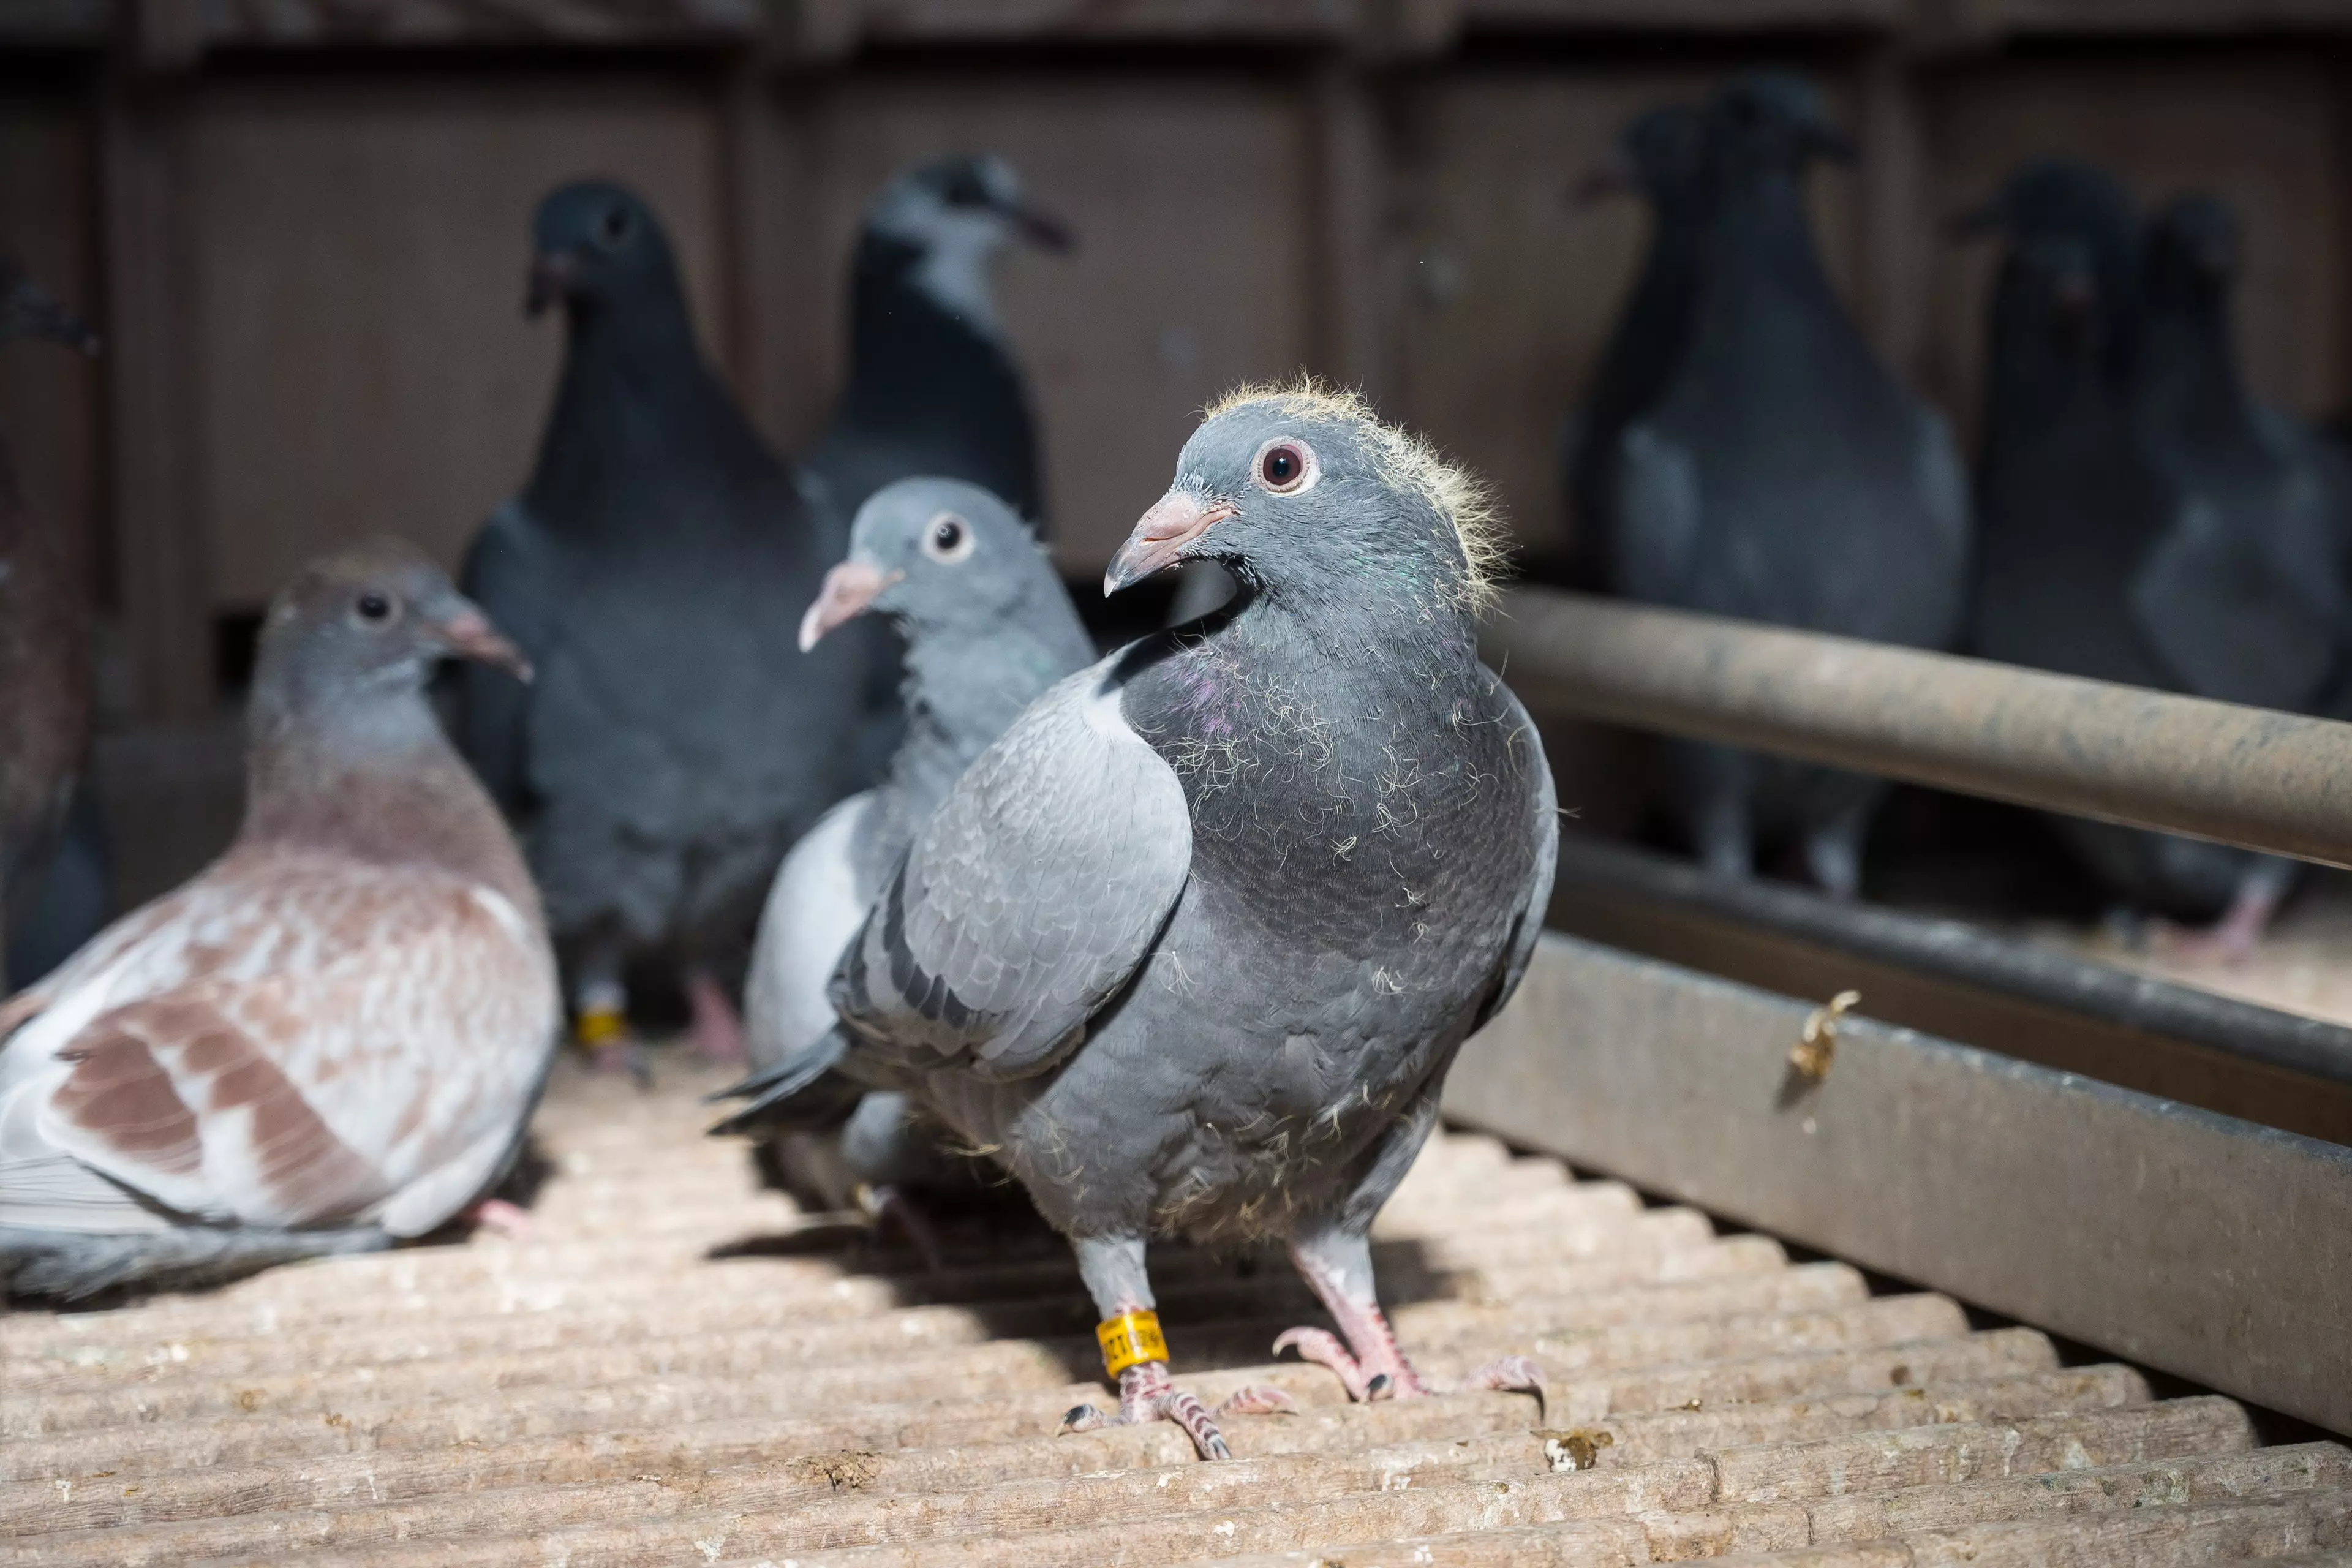 News of their fallen comrade filters through to the pigeon community.